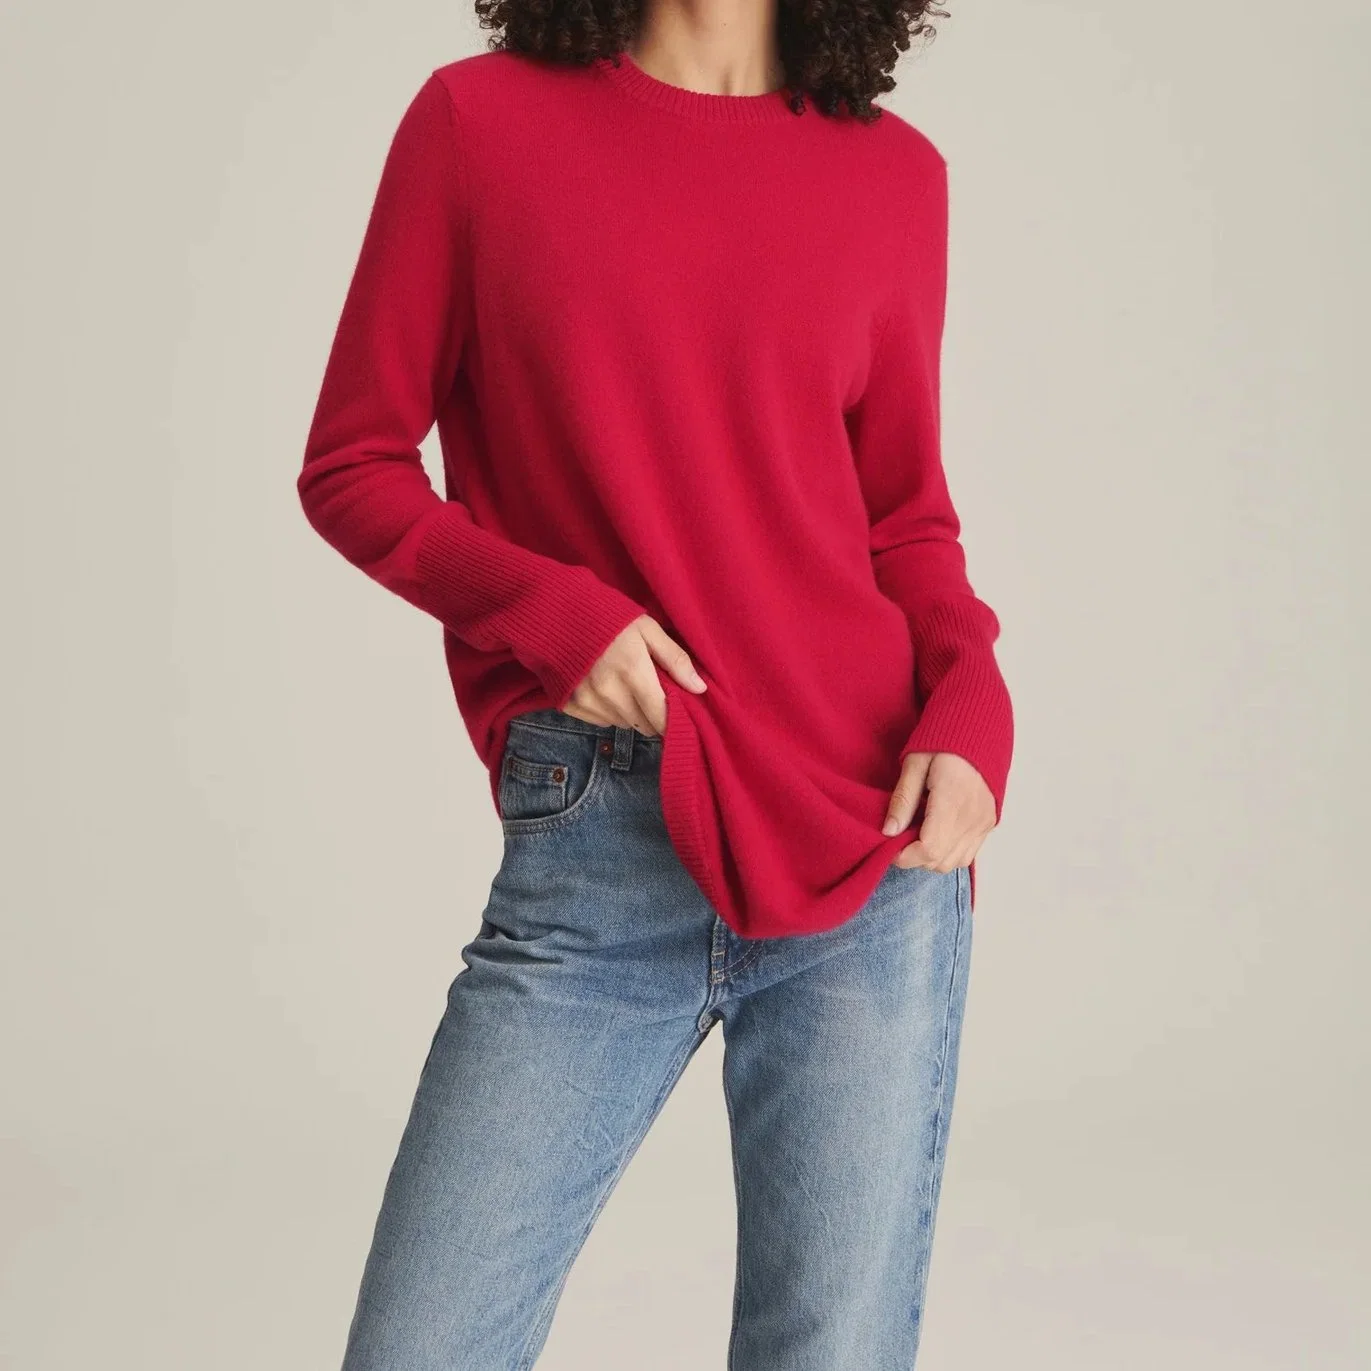 Pure Cashmere Knitted Ladies Fashion Crew Neck Curve Hem Sweater Apparel